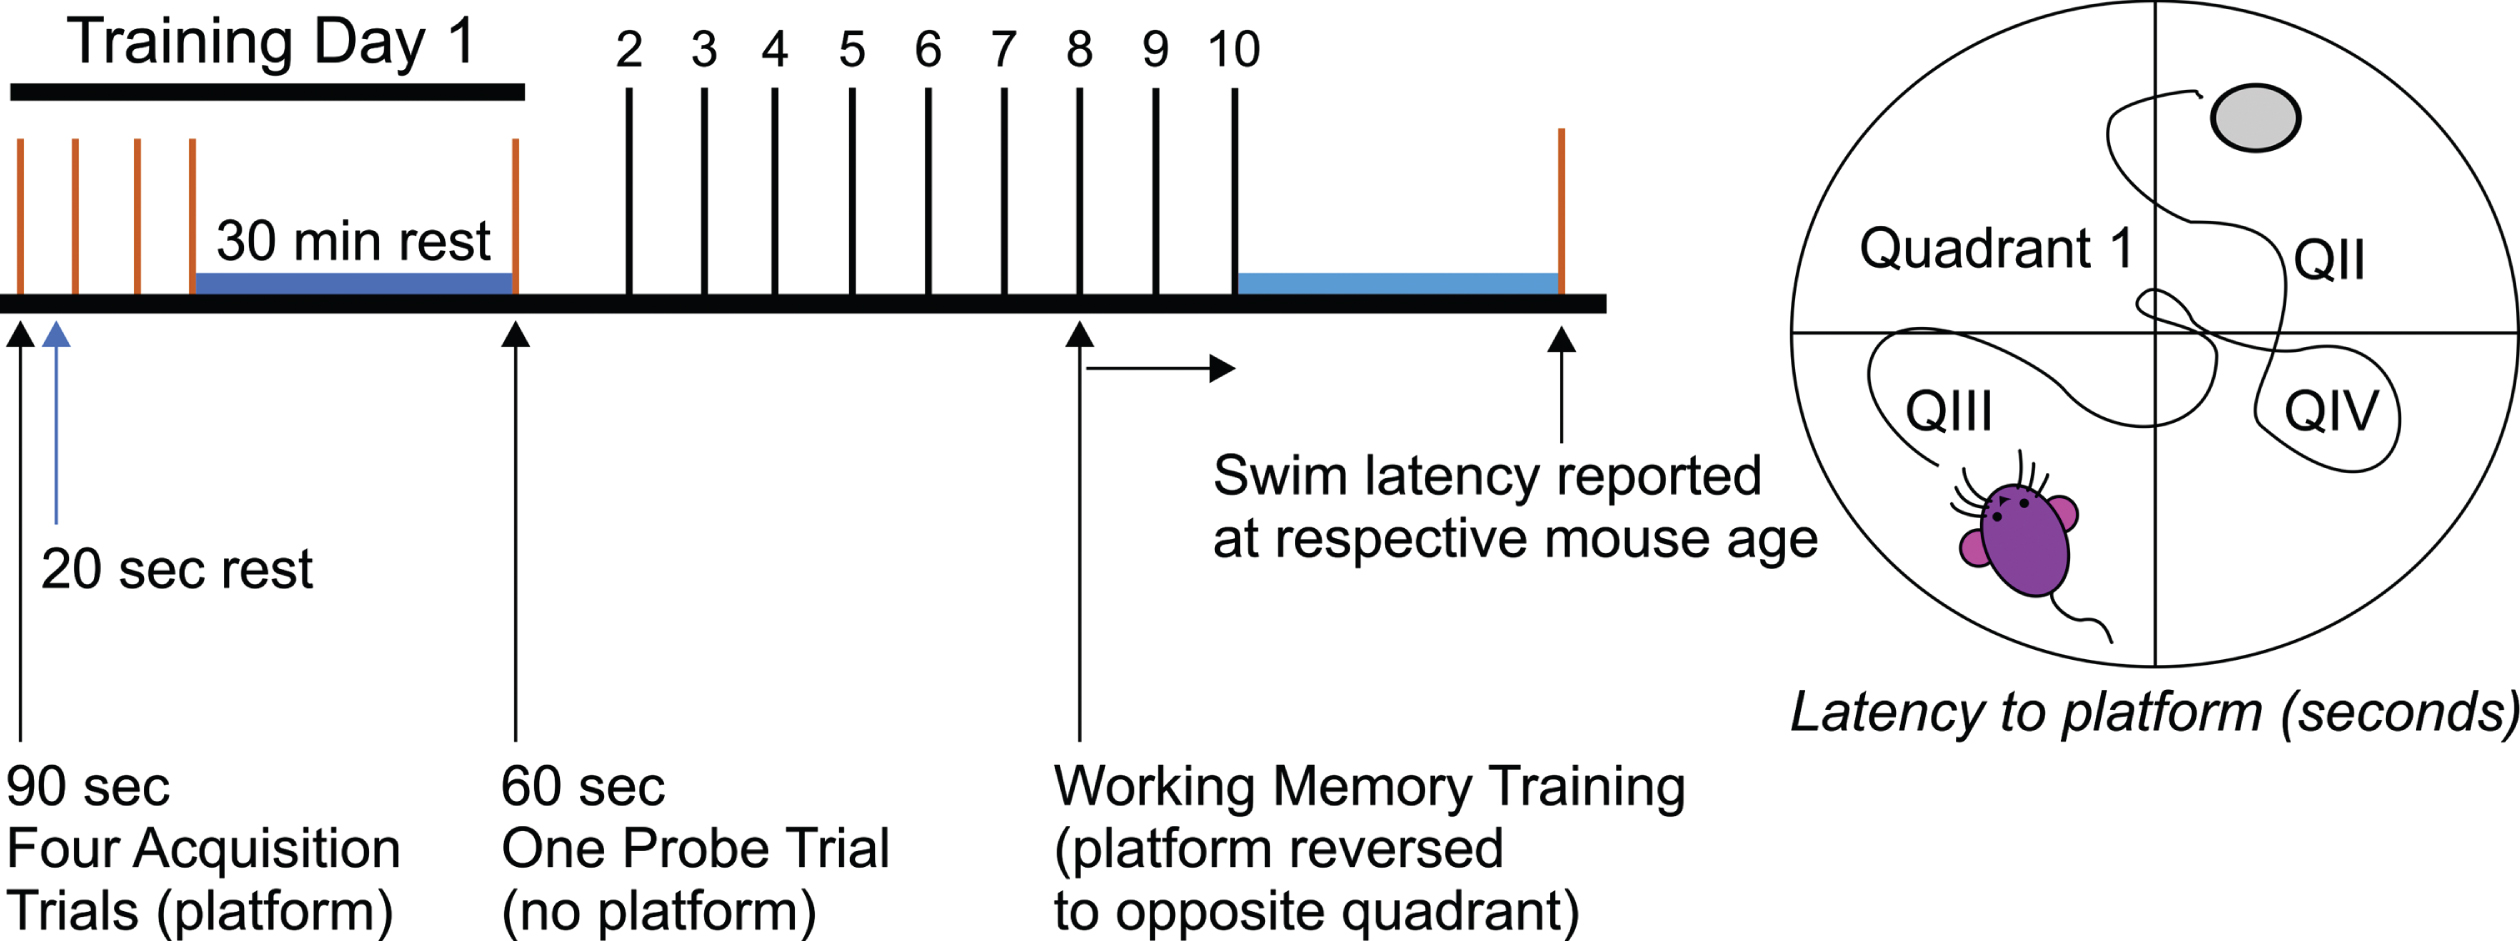 Evaluation of spatial memory in AβPP mice using the Morris Water Maze. The MWM is an intermittently sensitive test to evaluate reference memory performance for AβPP mice [47].